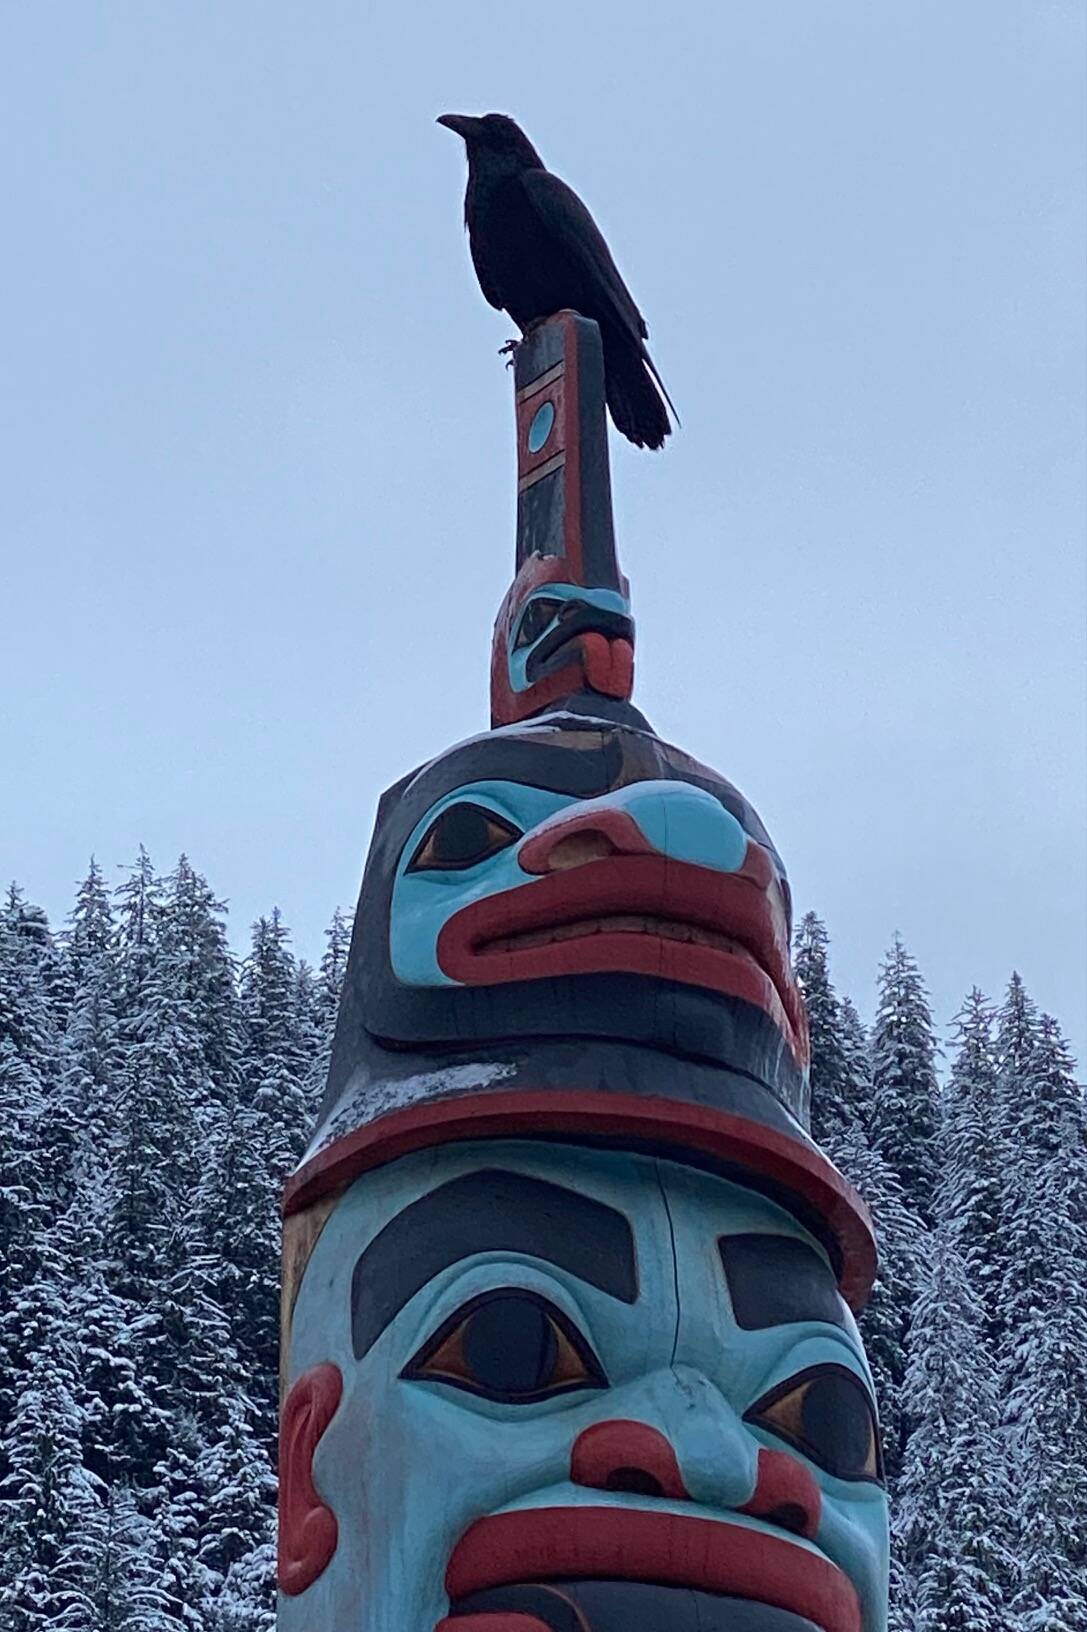 Raven becomes part of a Seawalk totem on Dec. 10. (Photo by Denise Carroll)